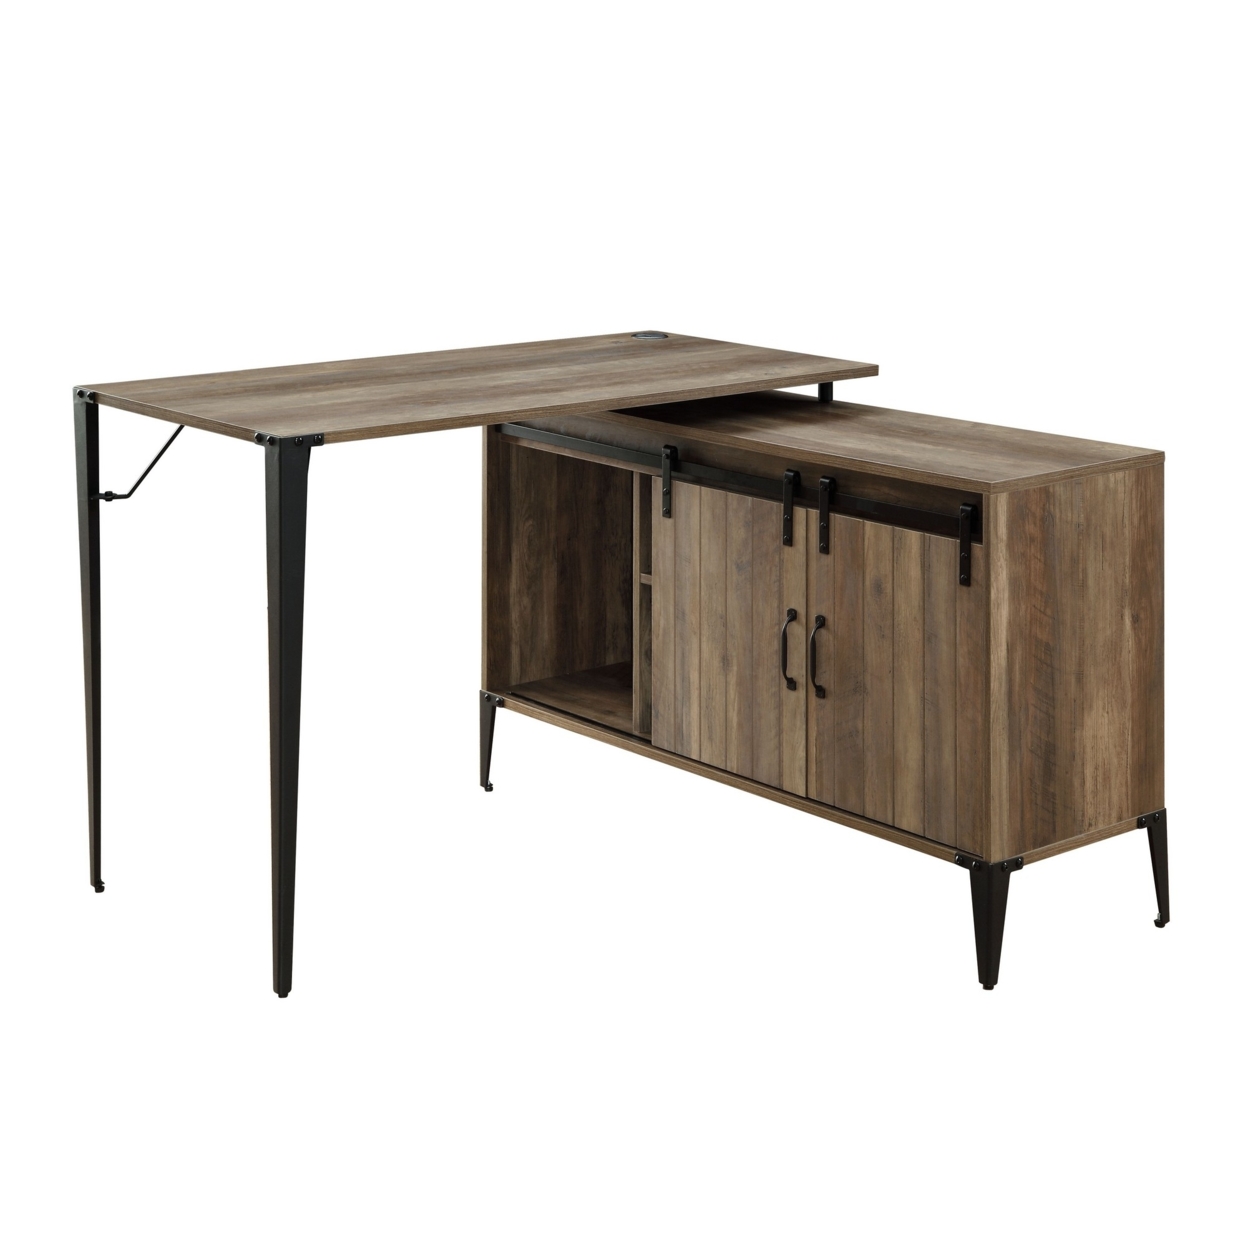 Writing Desk With L Shaped Tabletop And Sliding Barn Door, Brown And Black- Saltoro Sherpi